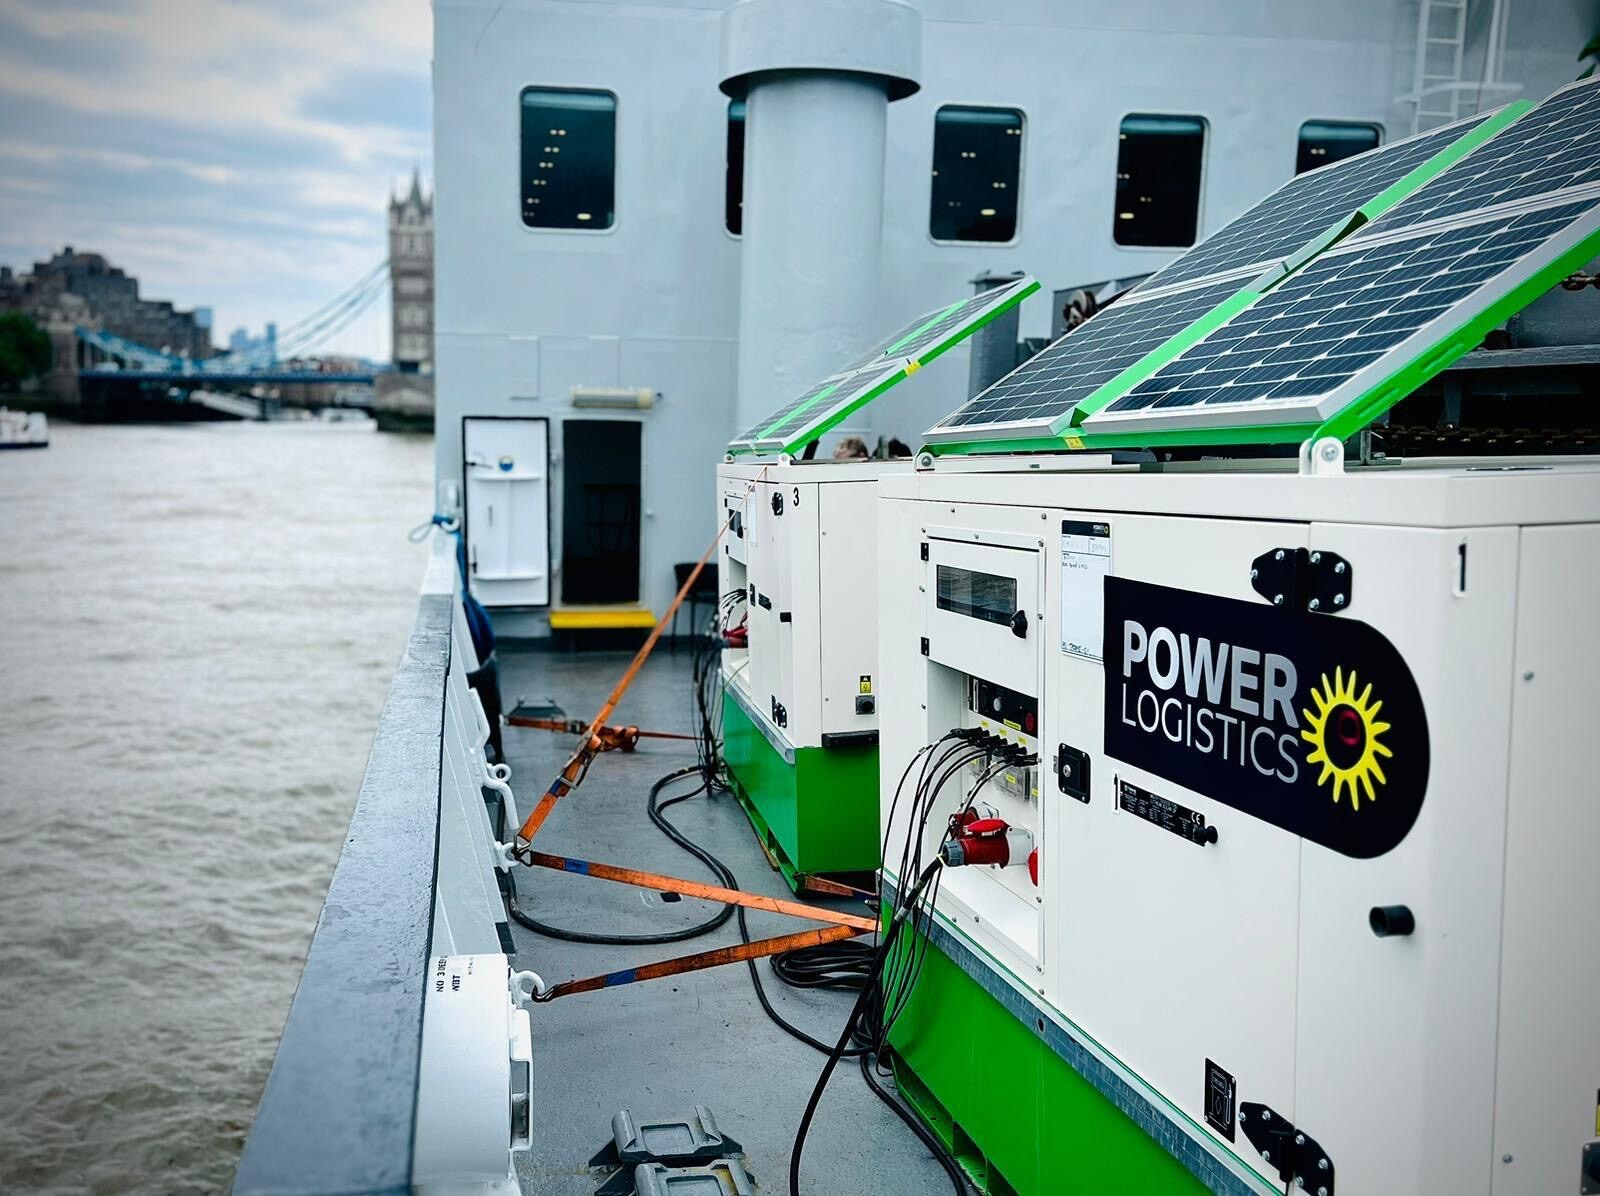 Global power specialists, Power Logistics invests in our solar hybrid generators